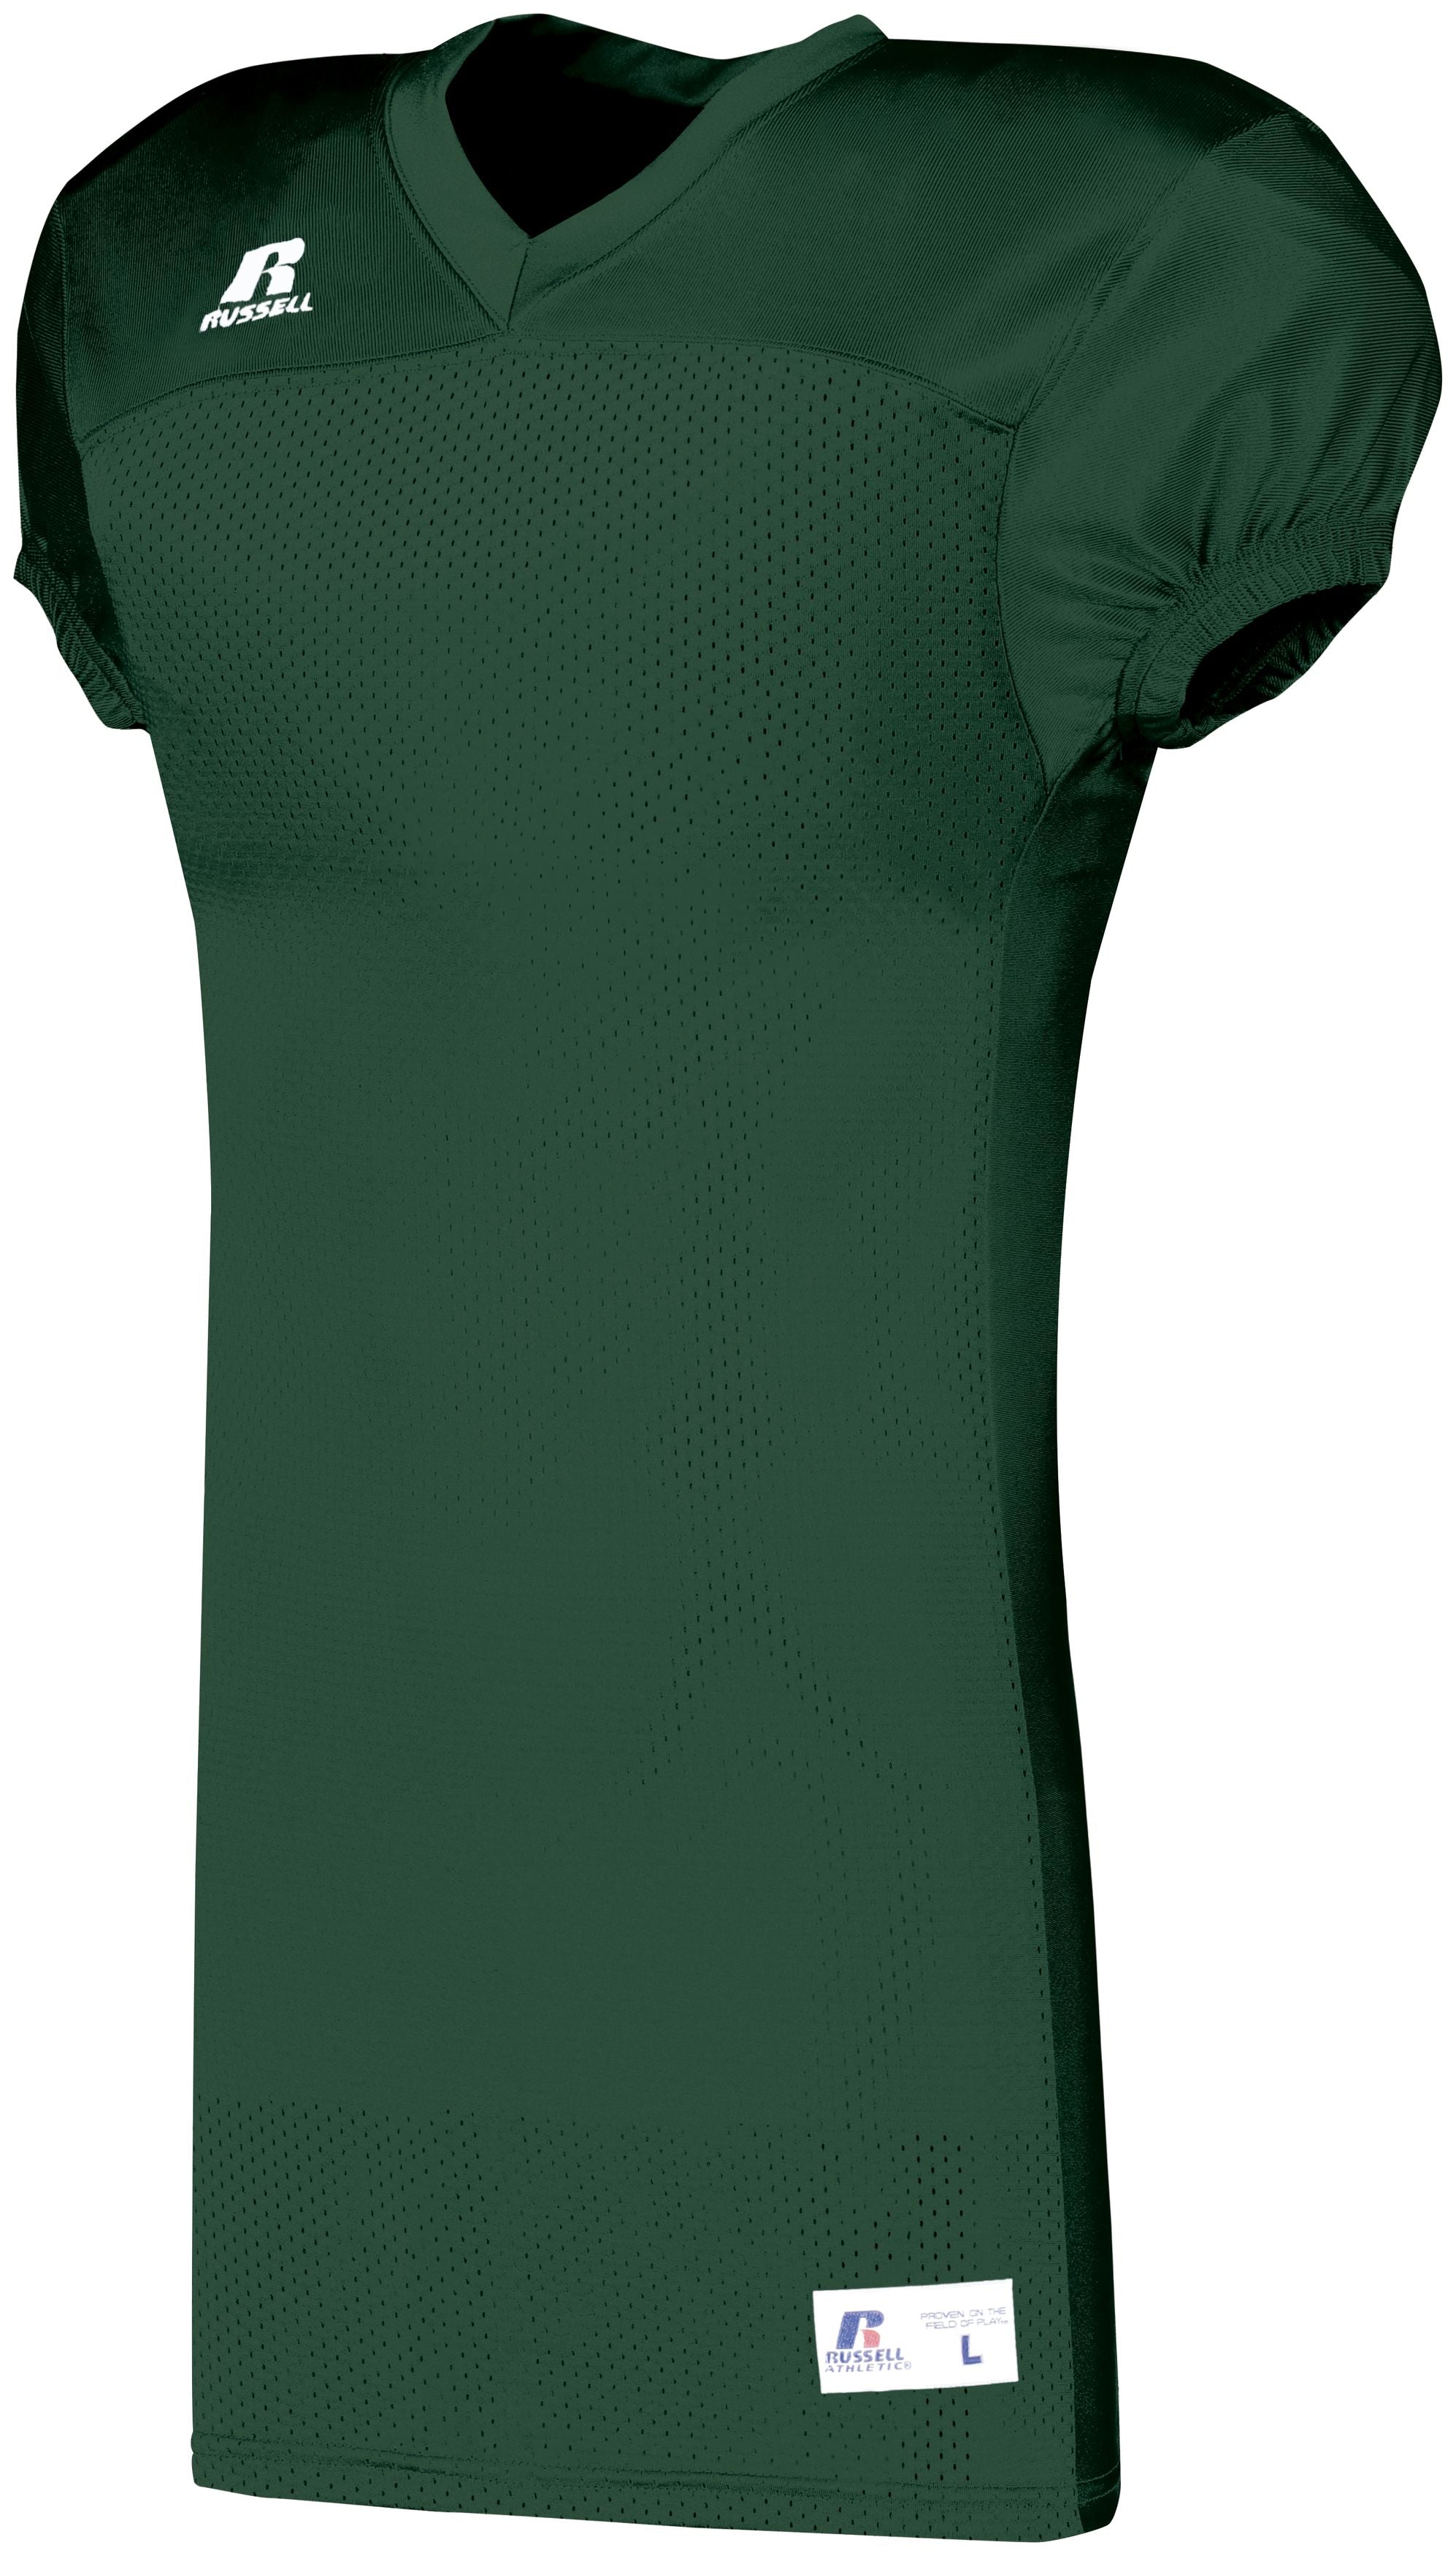 Russell Athletic Solid Jersey With Side Inserts in Dark Green  -Part of the Adult, Adult-Jersey, Football, Russell-Athletic-Products, Shirts, All-Sports, All-Sports-1 product lines at KanaleyCreations.com